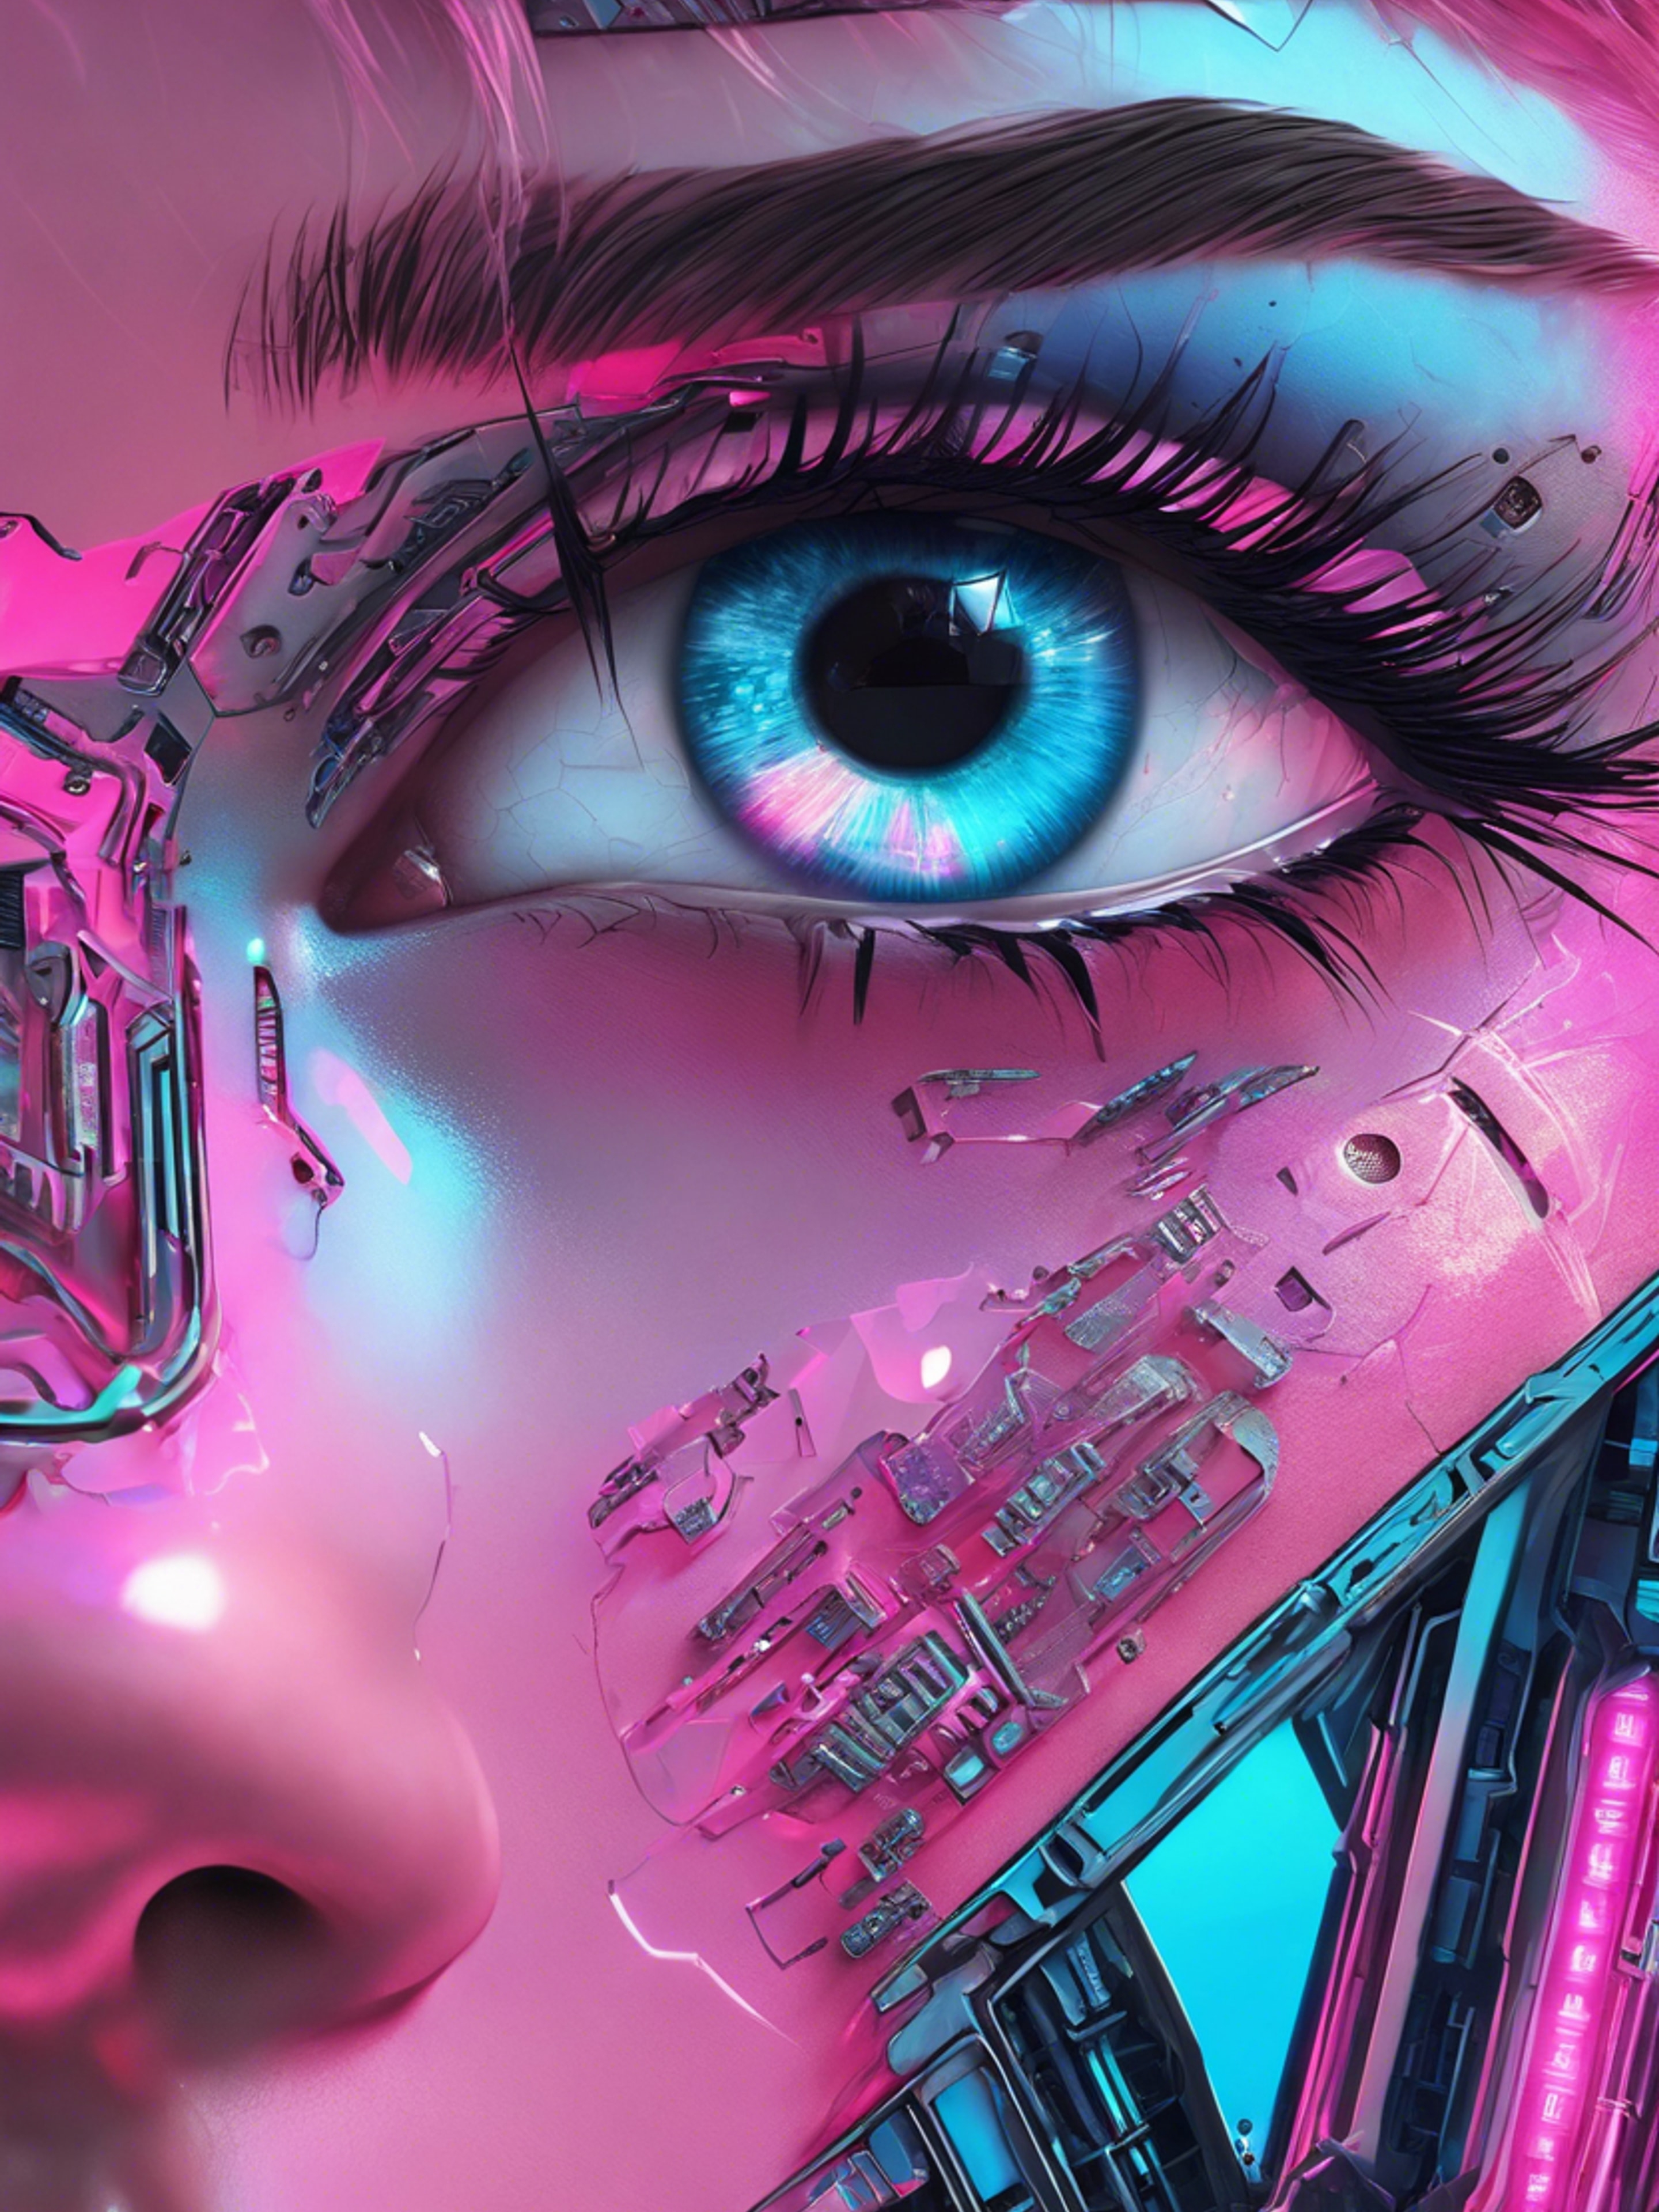 A close-up of a cyberpunk girl's eye, reflecting pink and blue city lights.壁紙[805009a14d1a4c10afac]